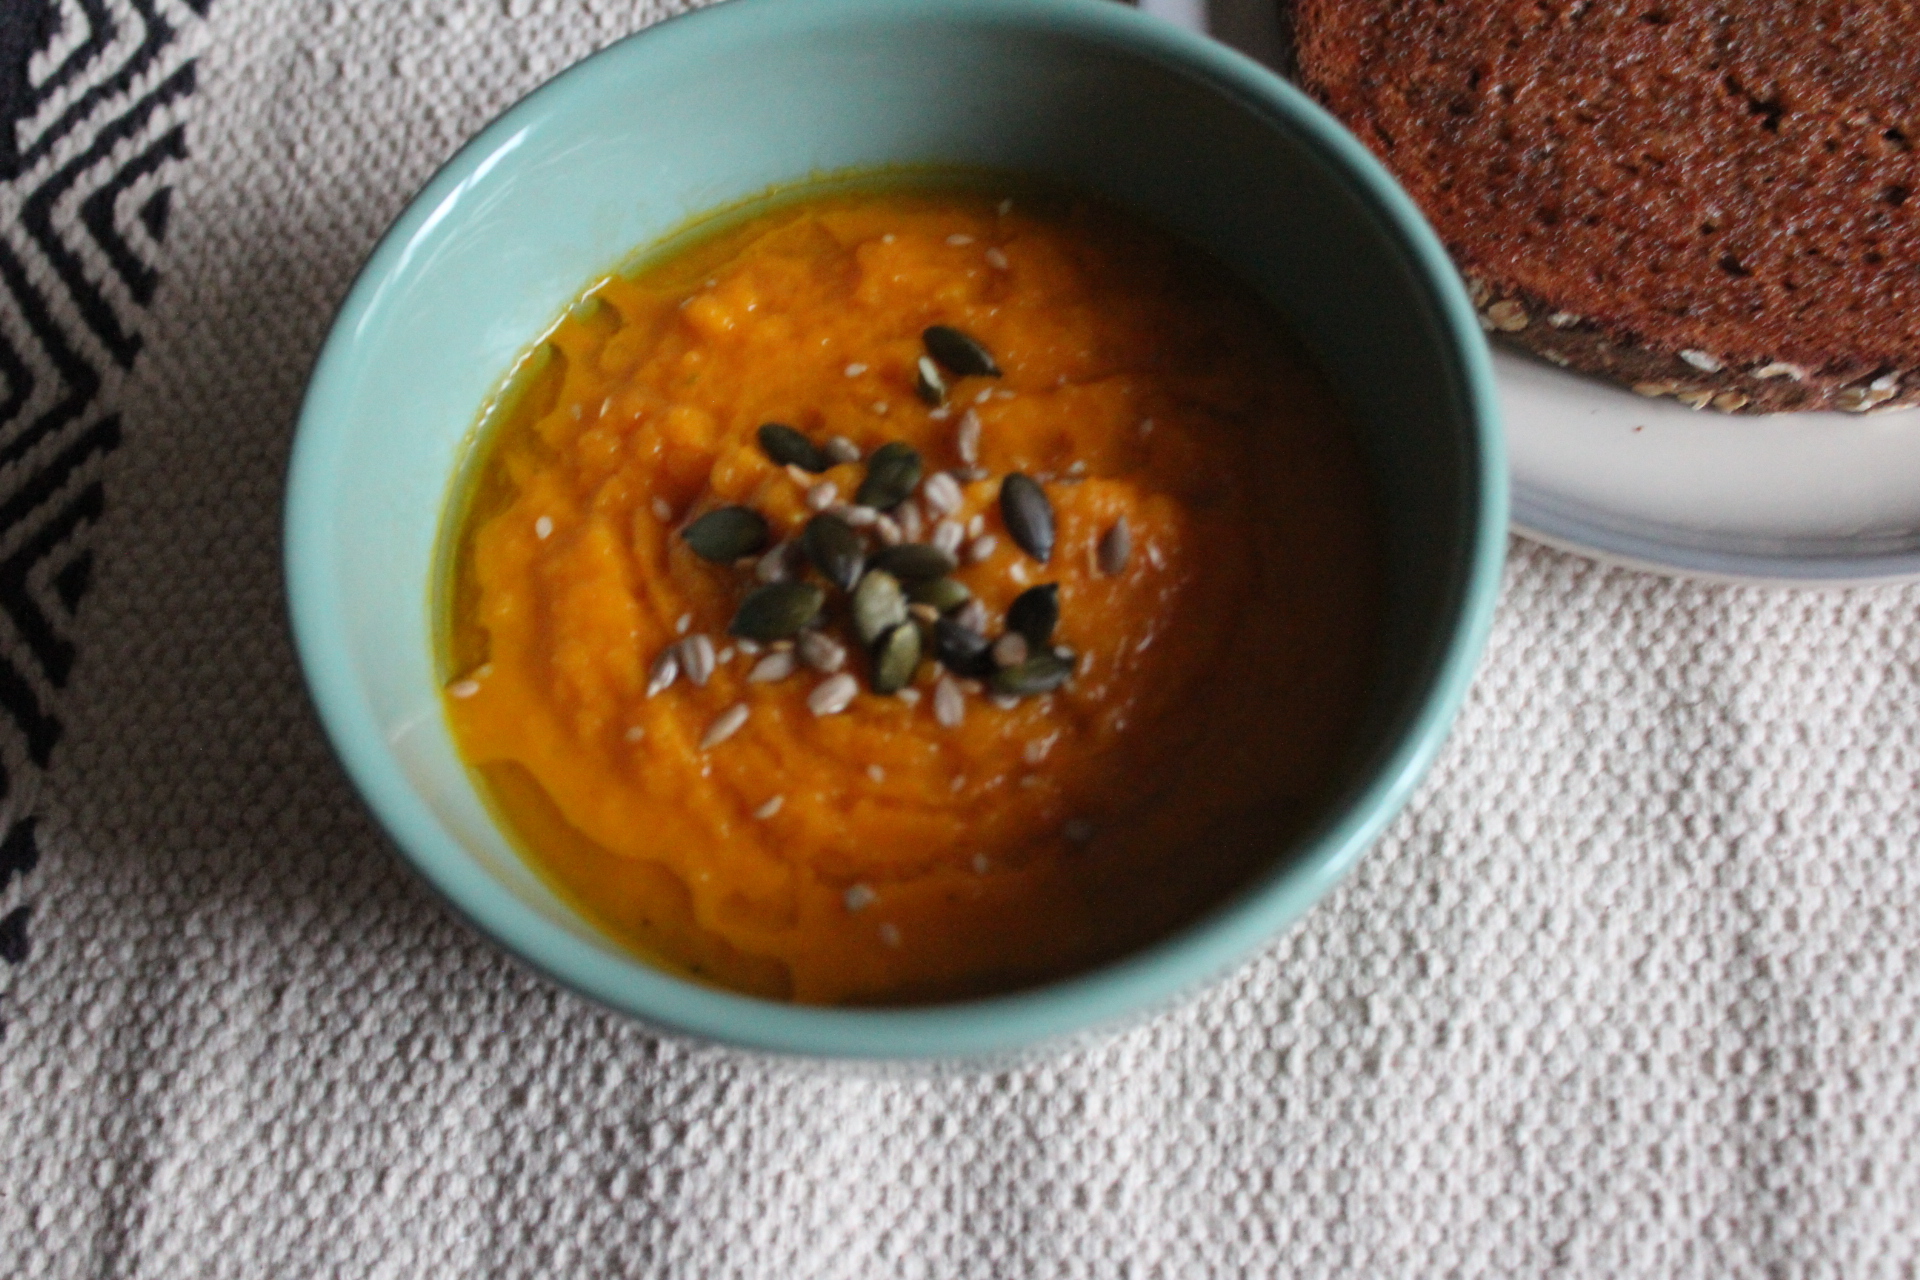 Healthy Recipe: Honey Roasted Carrot and Parsnip Soup